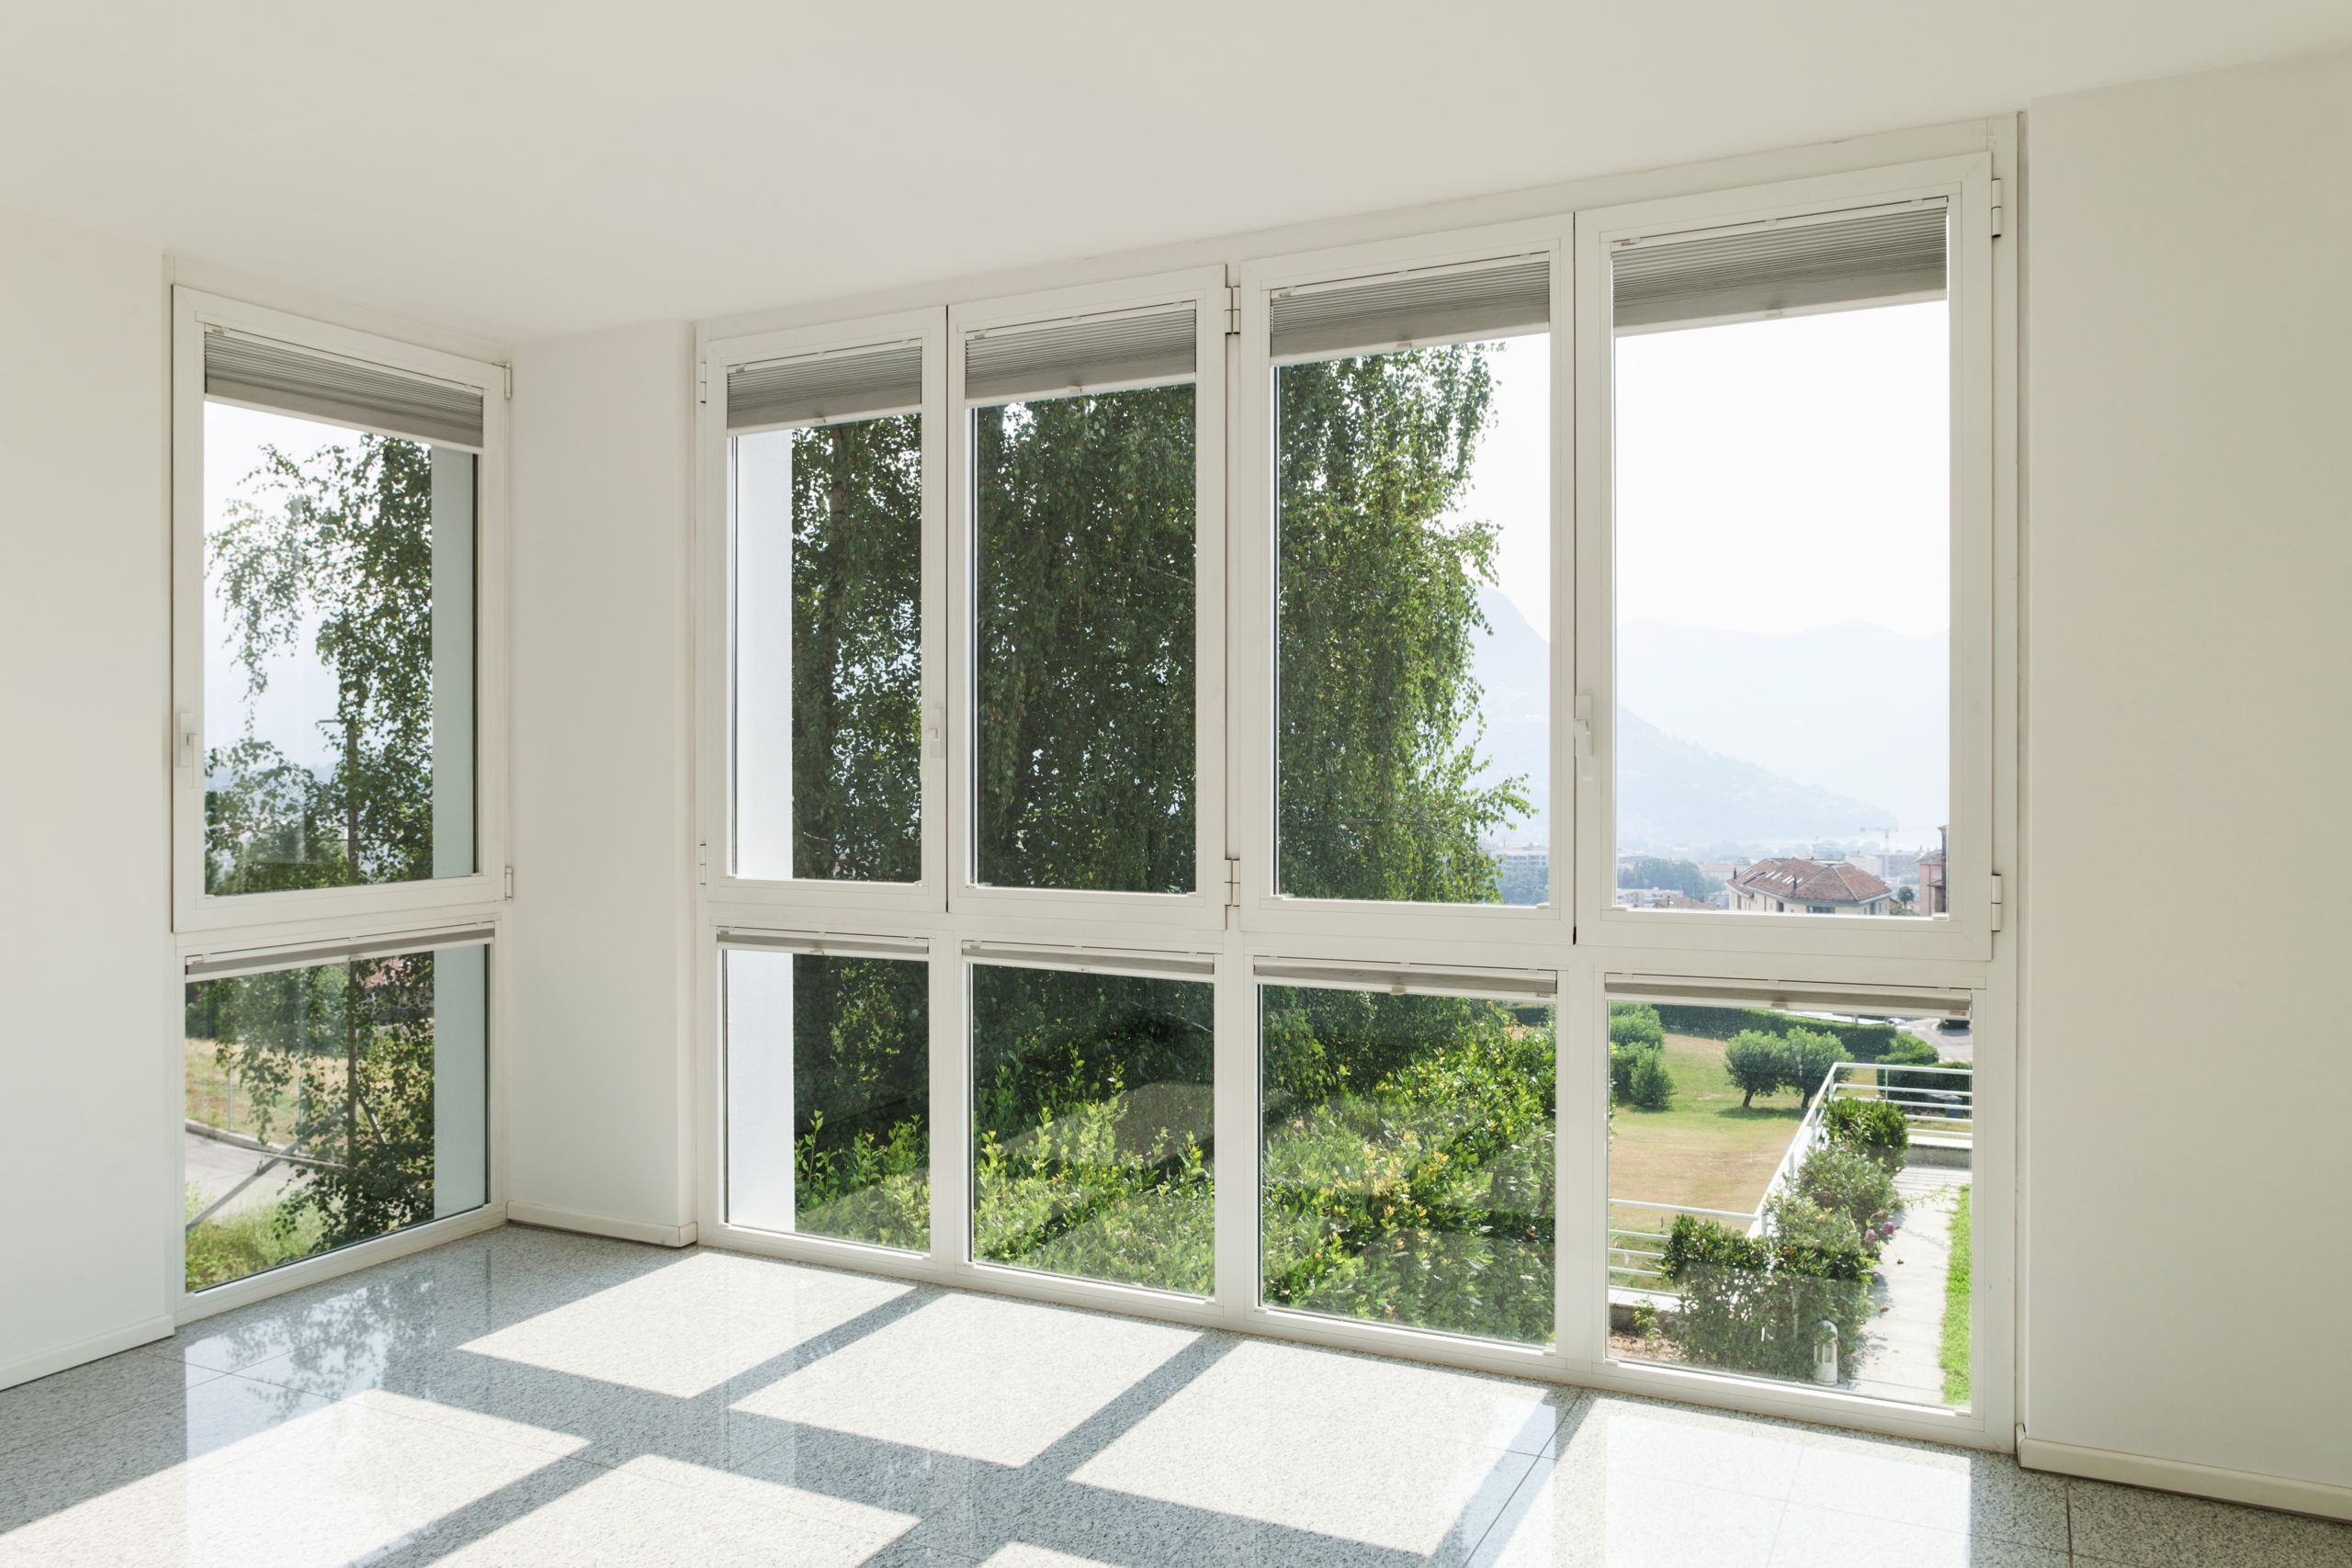 4 common problems with windows and doors